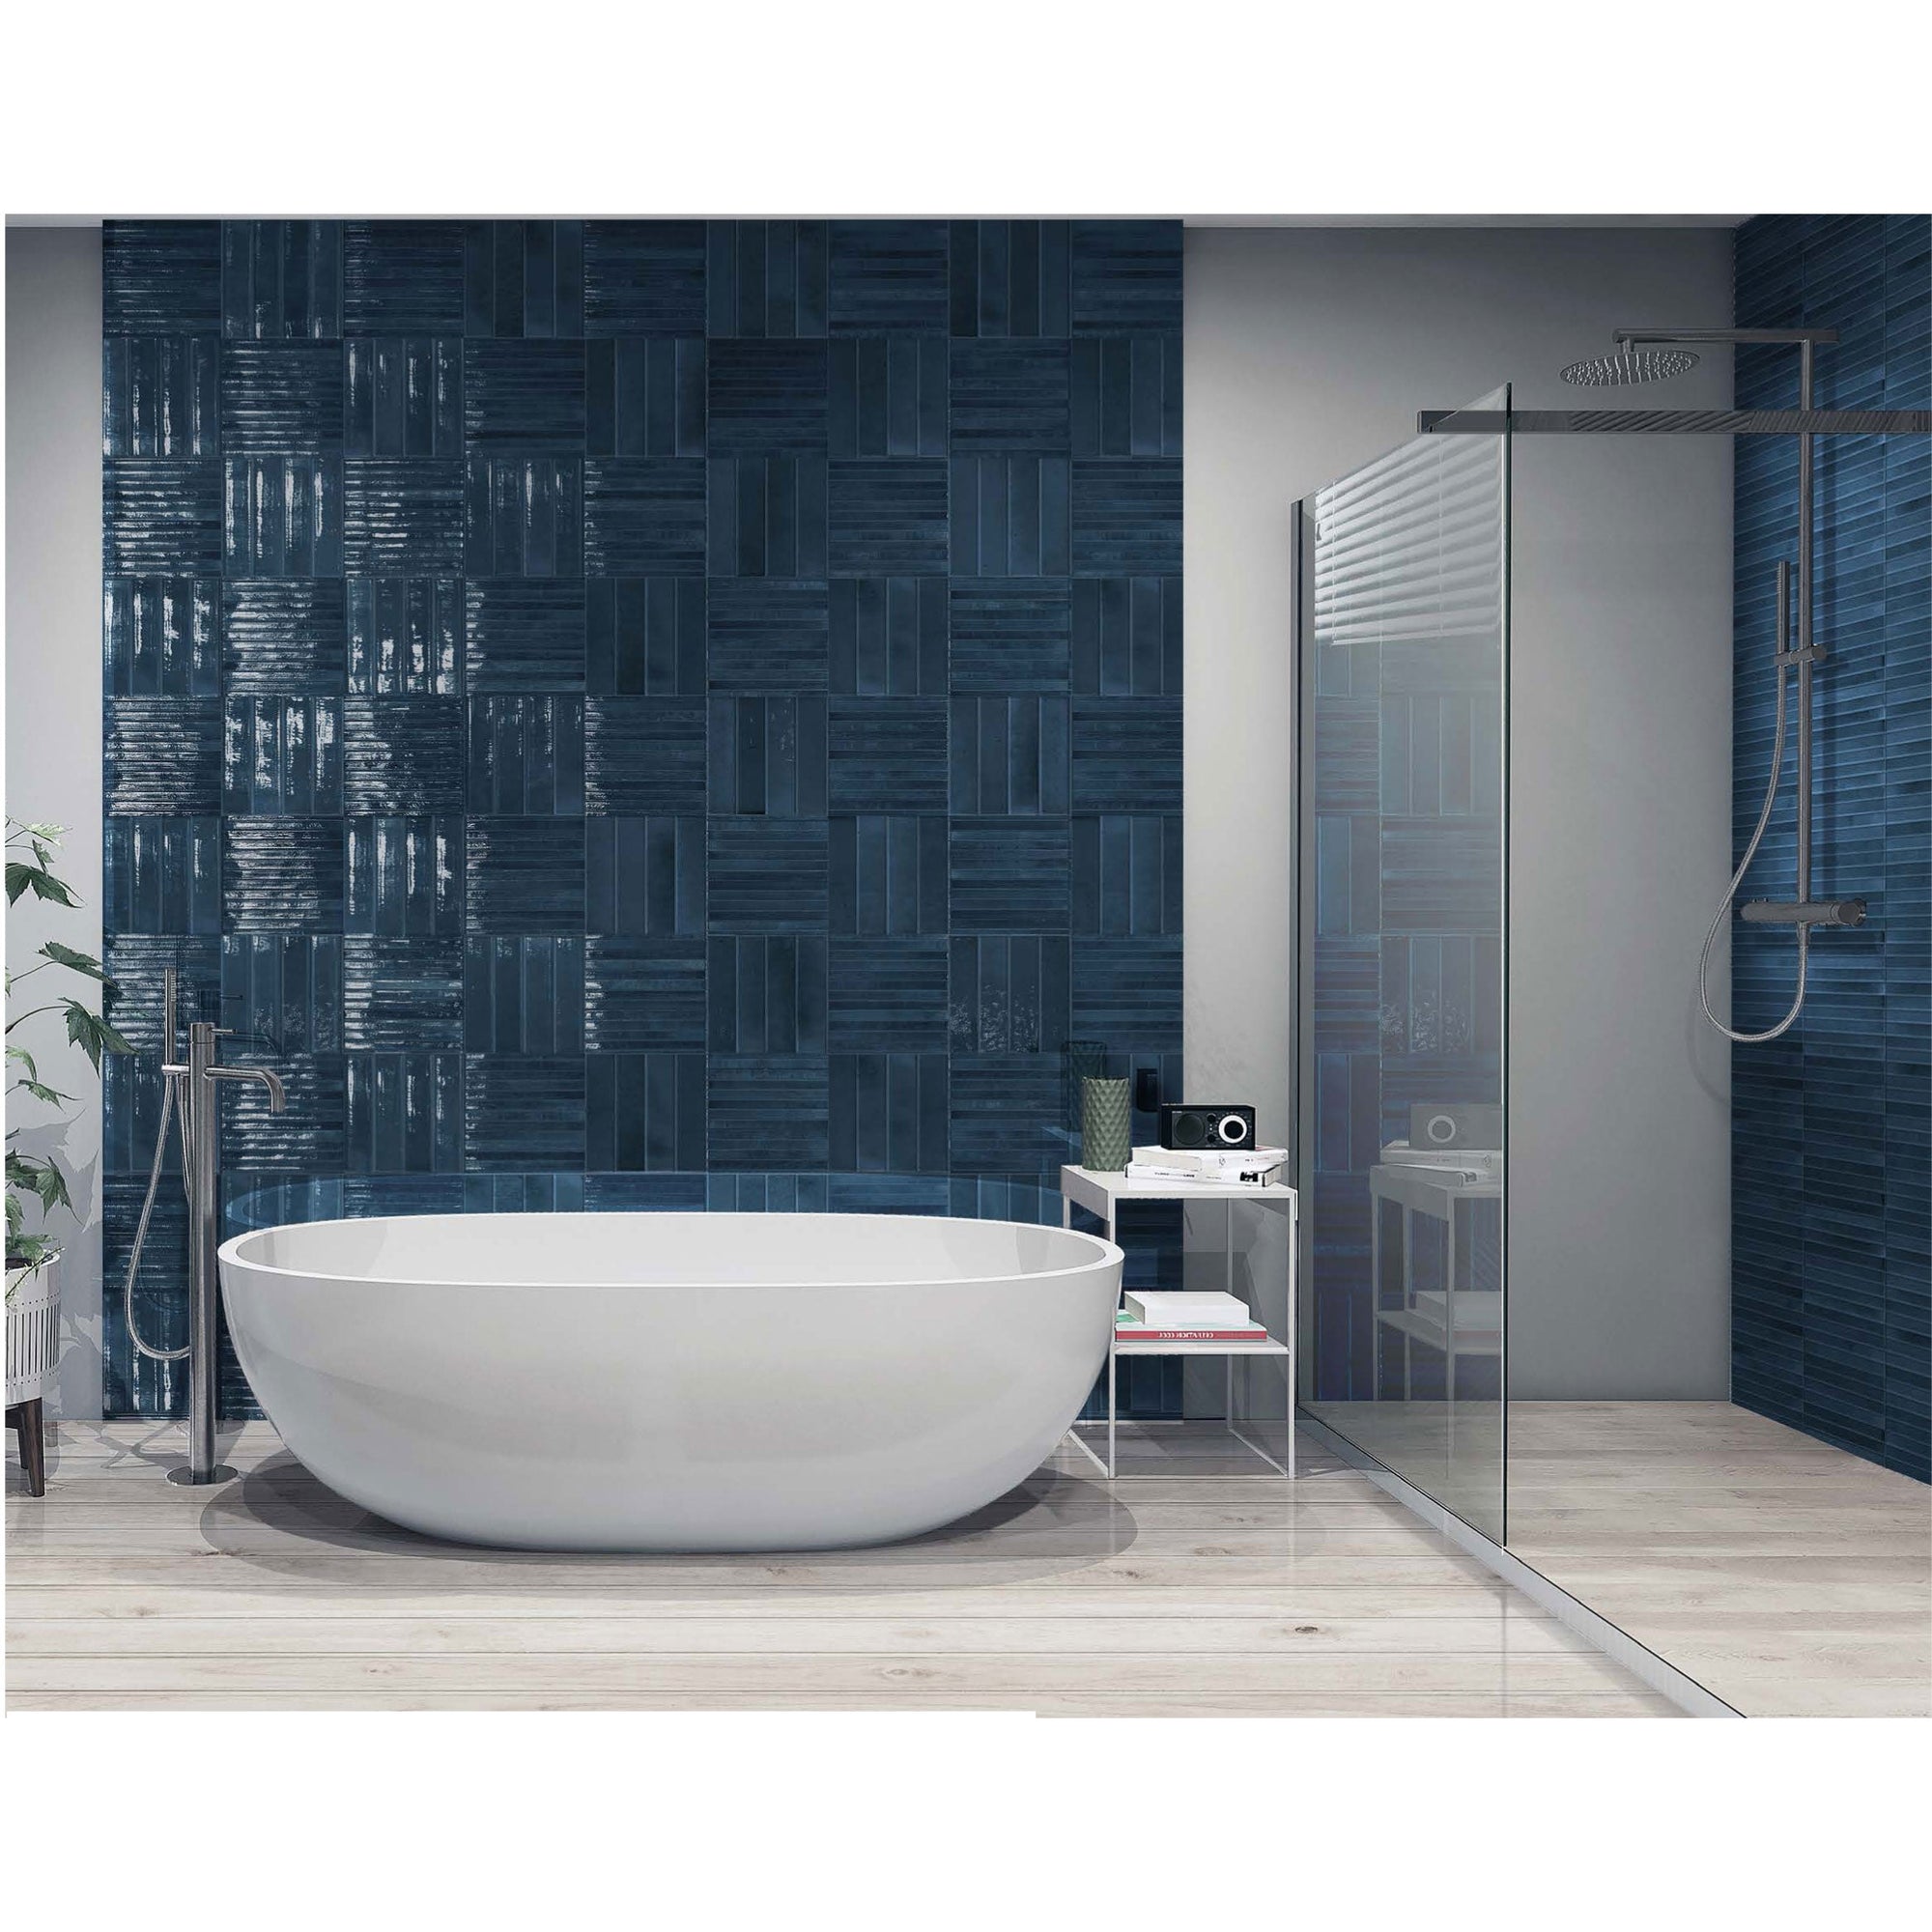 Cobsa - Homey Series 5 in. x 10 in. Porcelain Subway Tile - Navy